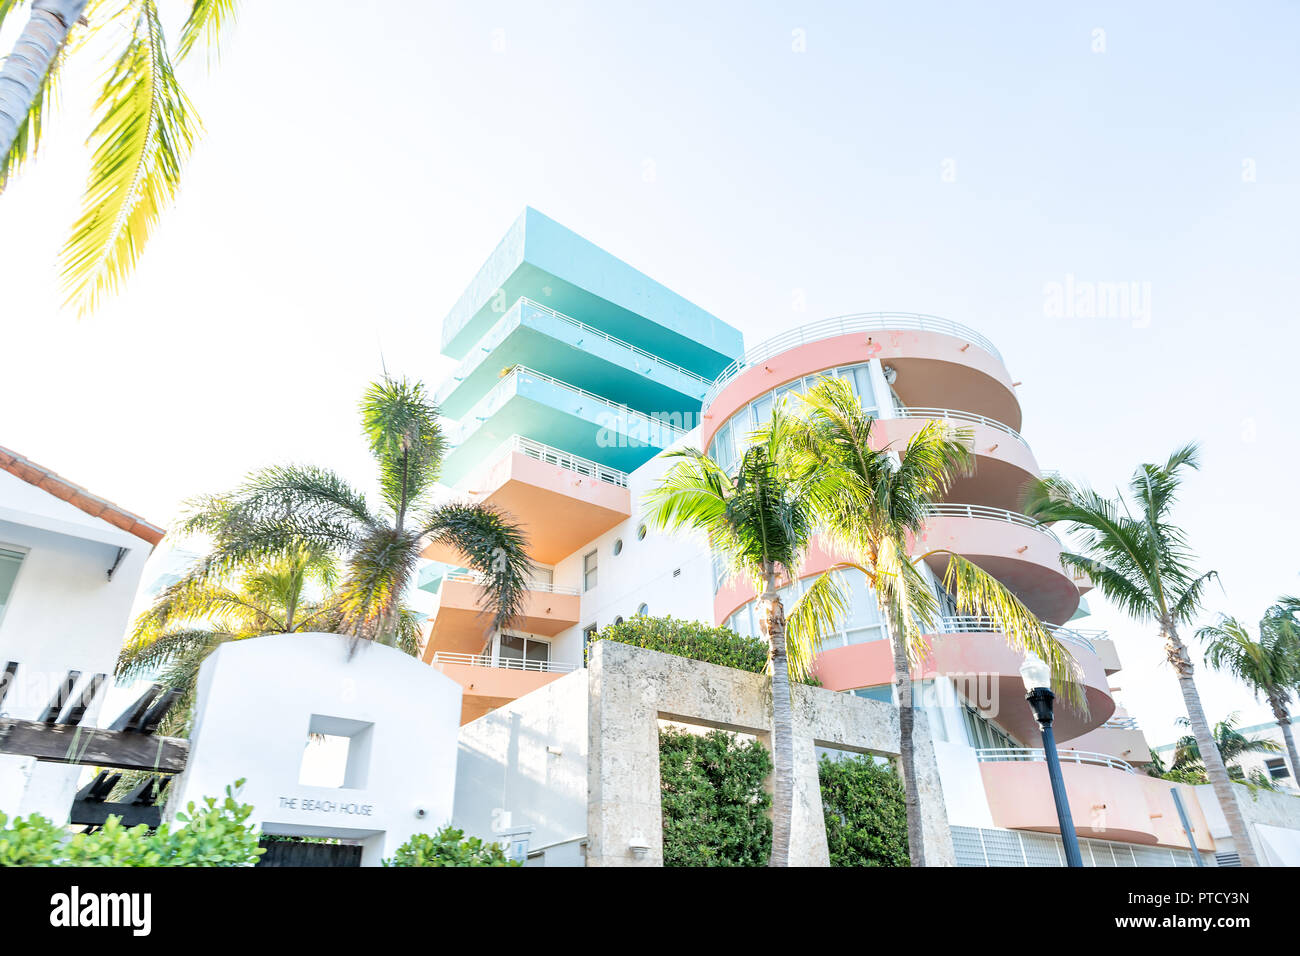 South Beach, USA - May 5, 2018: Entrance to colorful the Beach House hotel in Miami, Florida in Art Deco district with nobody during sunny day, palm t Stock Photo